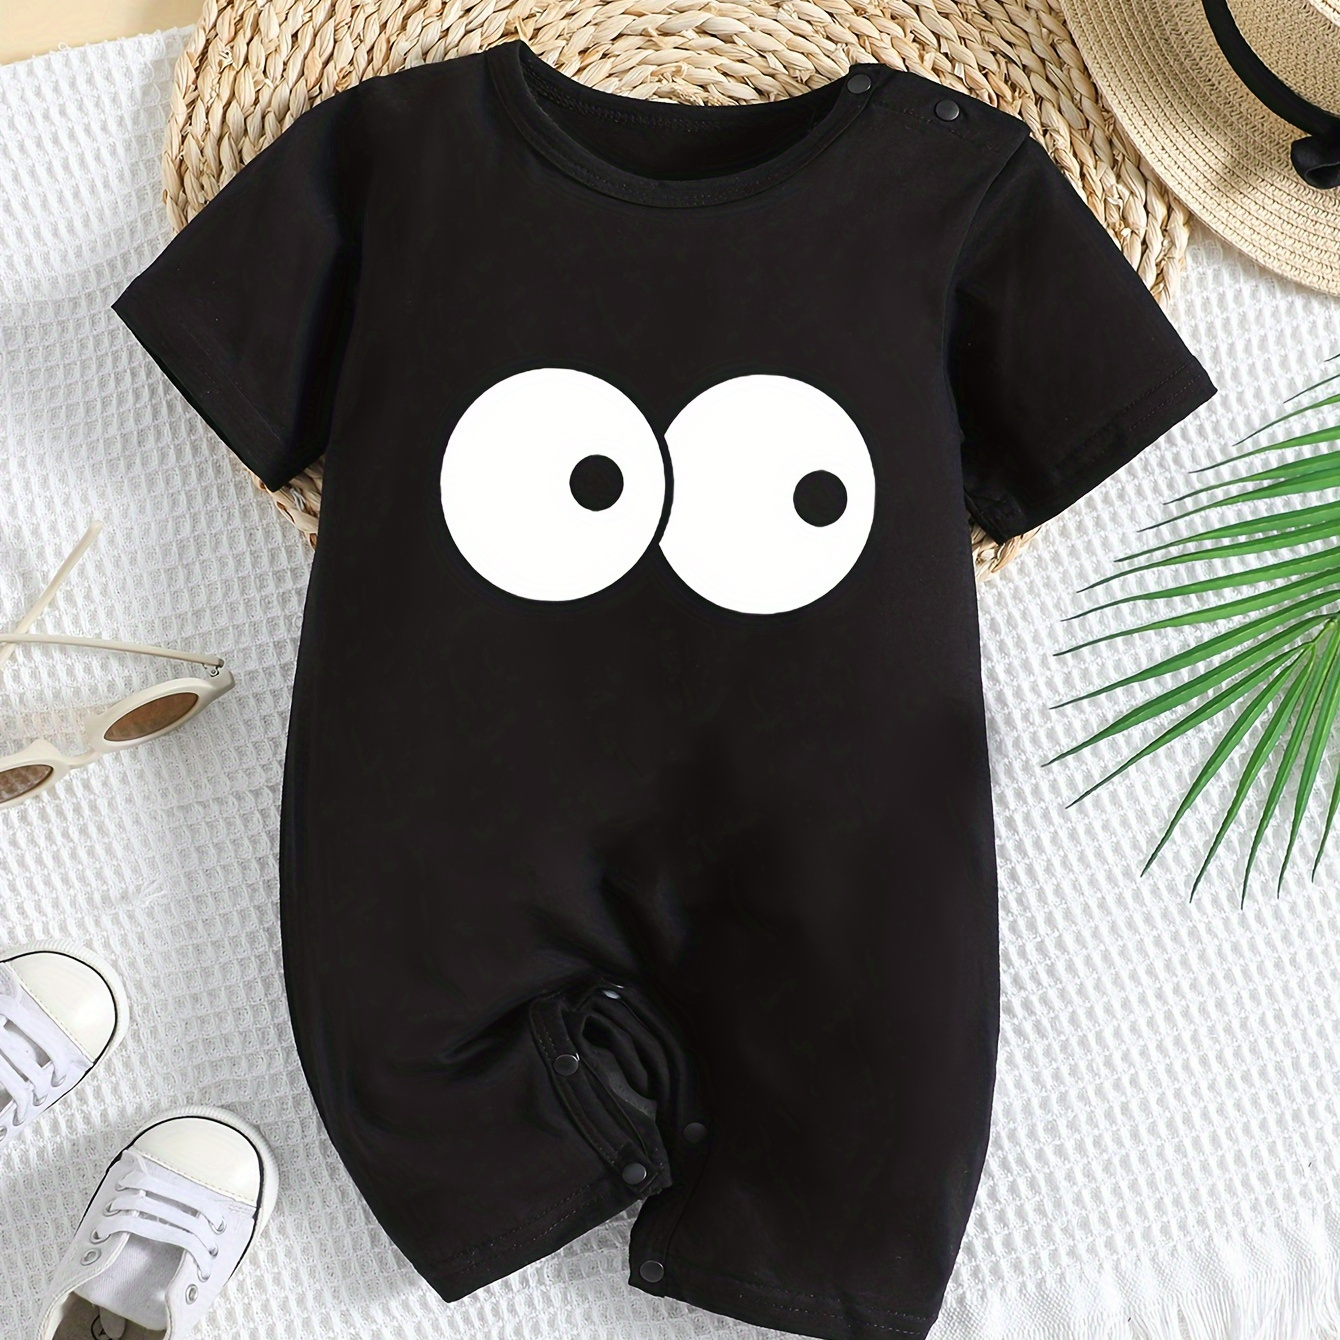 

Unisex Infant Black Romper With Big Eyes Print, Cute Cartoon Short Sleeve Onesie, Snapsuit For Newborns, Soft Pure Cotton Outfit